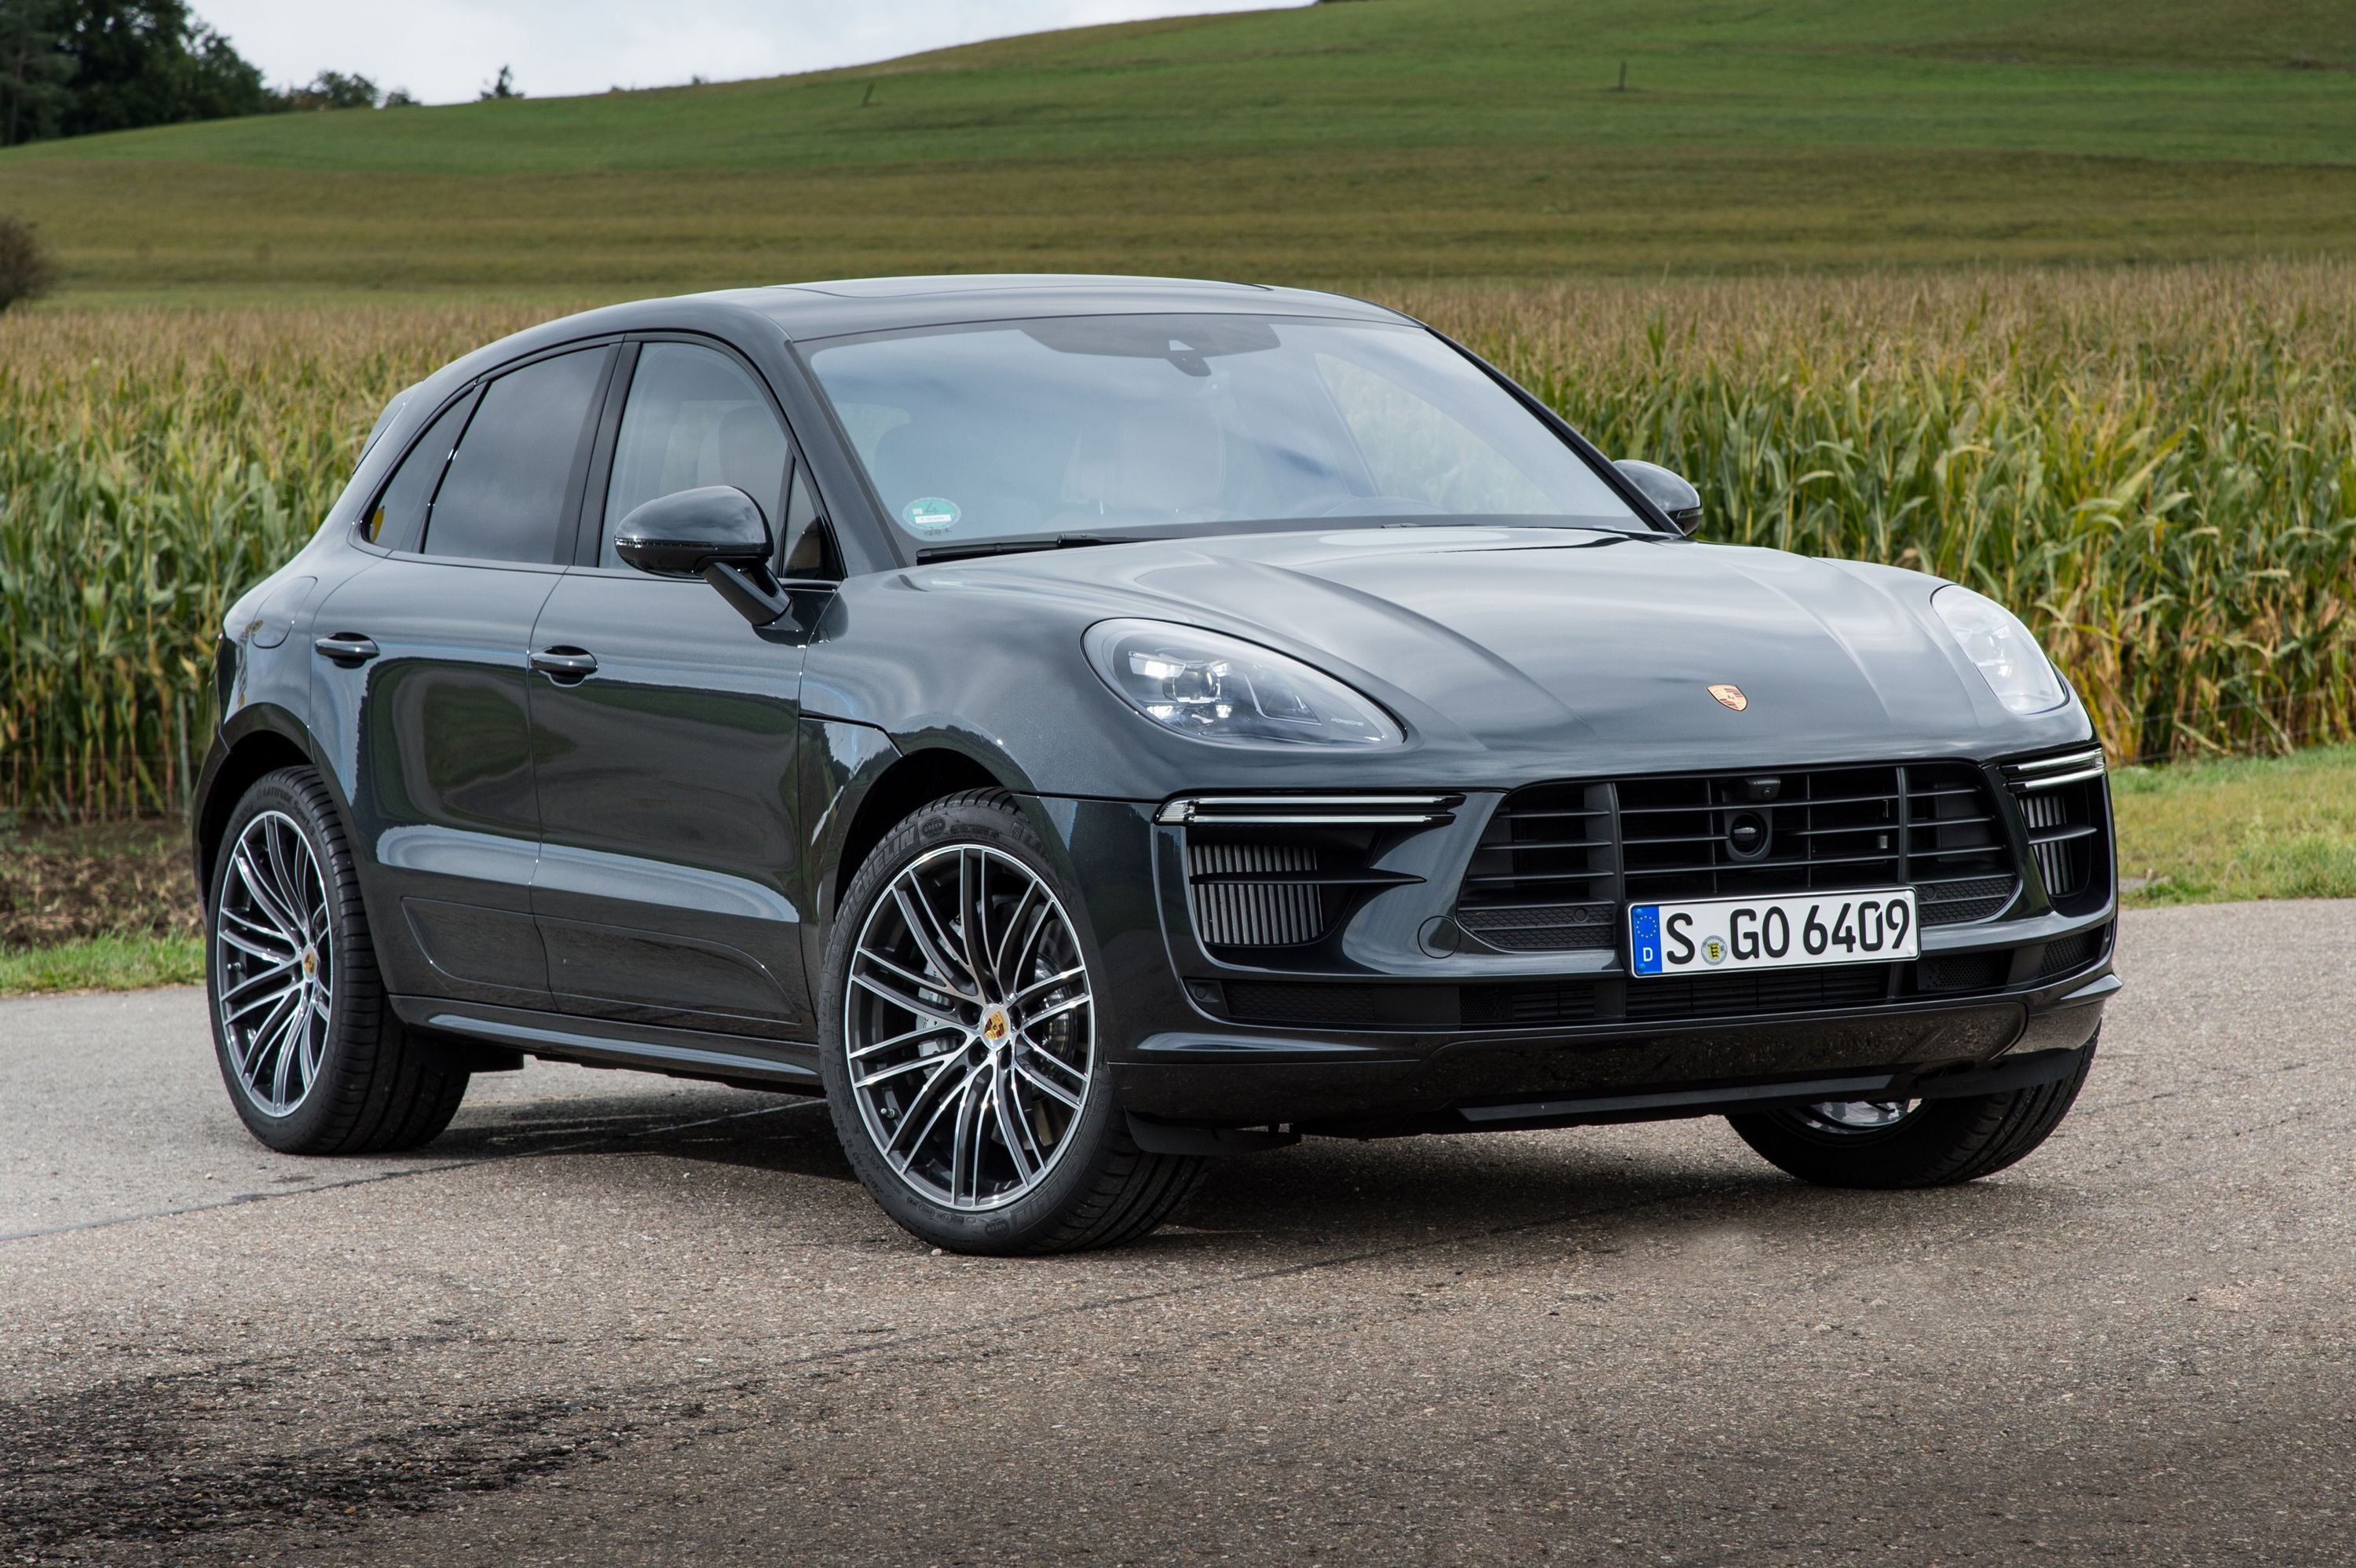 Porsche Macan Turbo Review, Pricing, and Specs